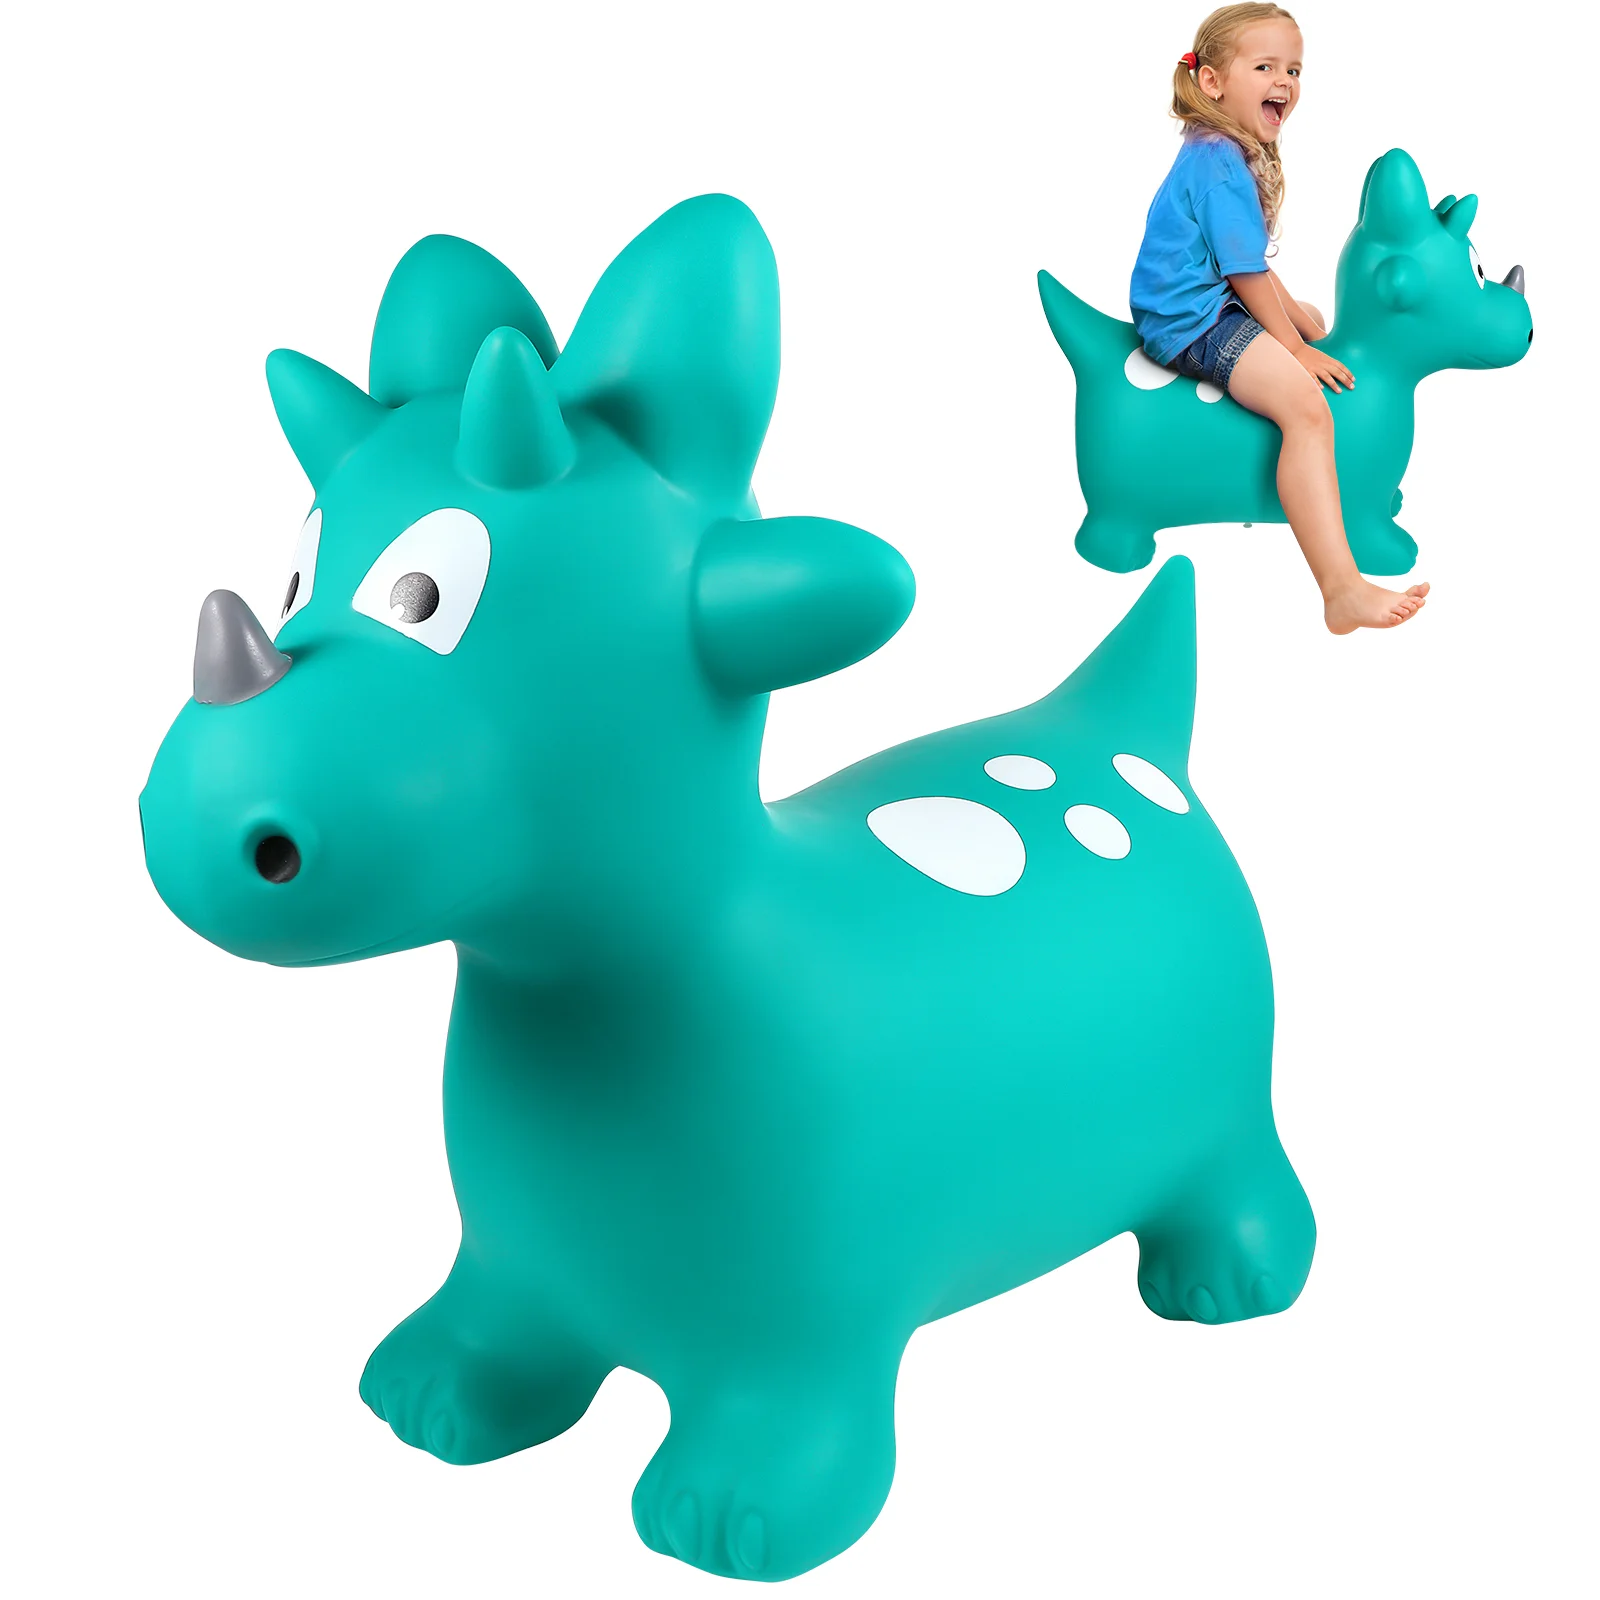 Flatable jumping horse toy with music ideal for physical development and birthday gifts thumb200